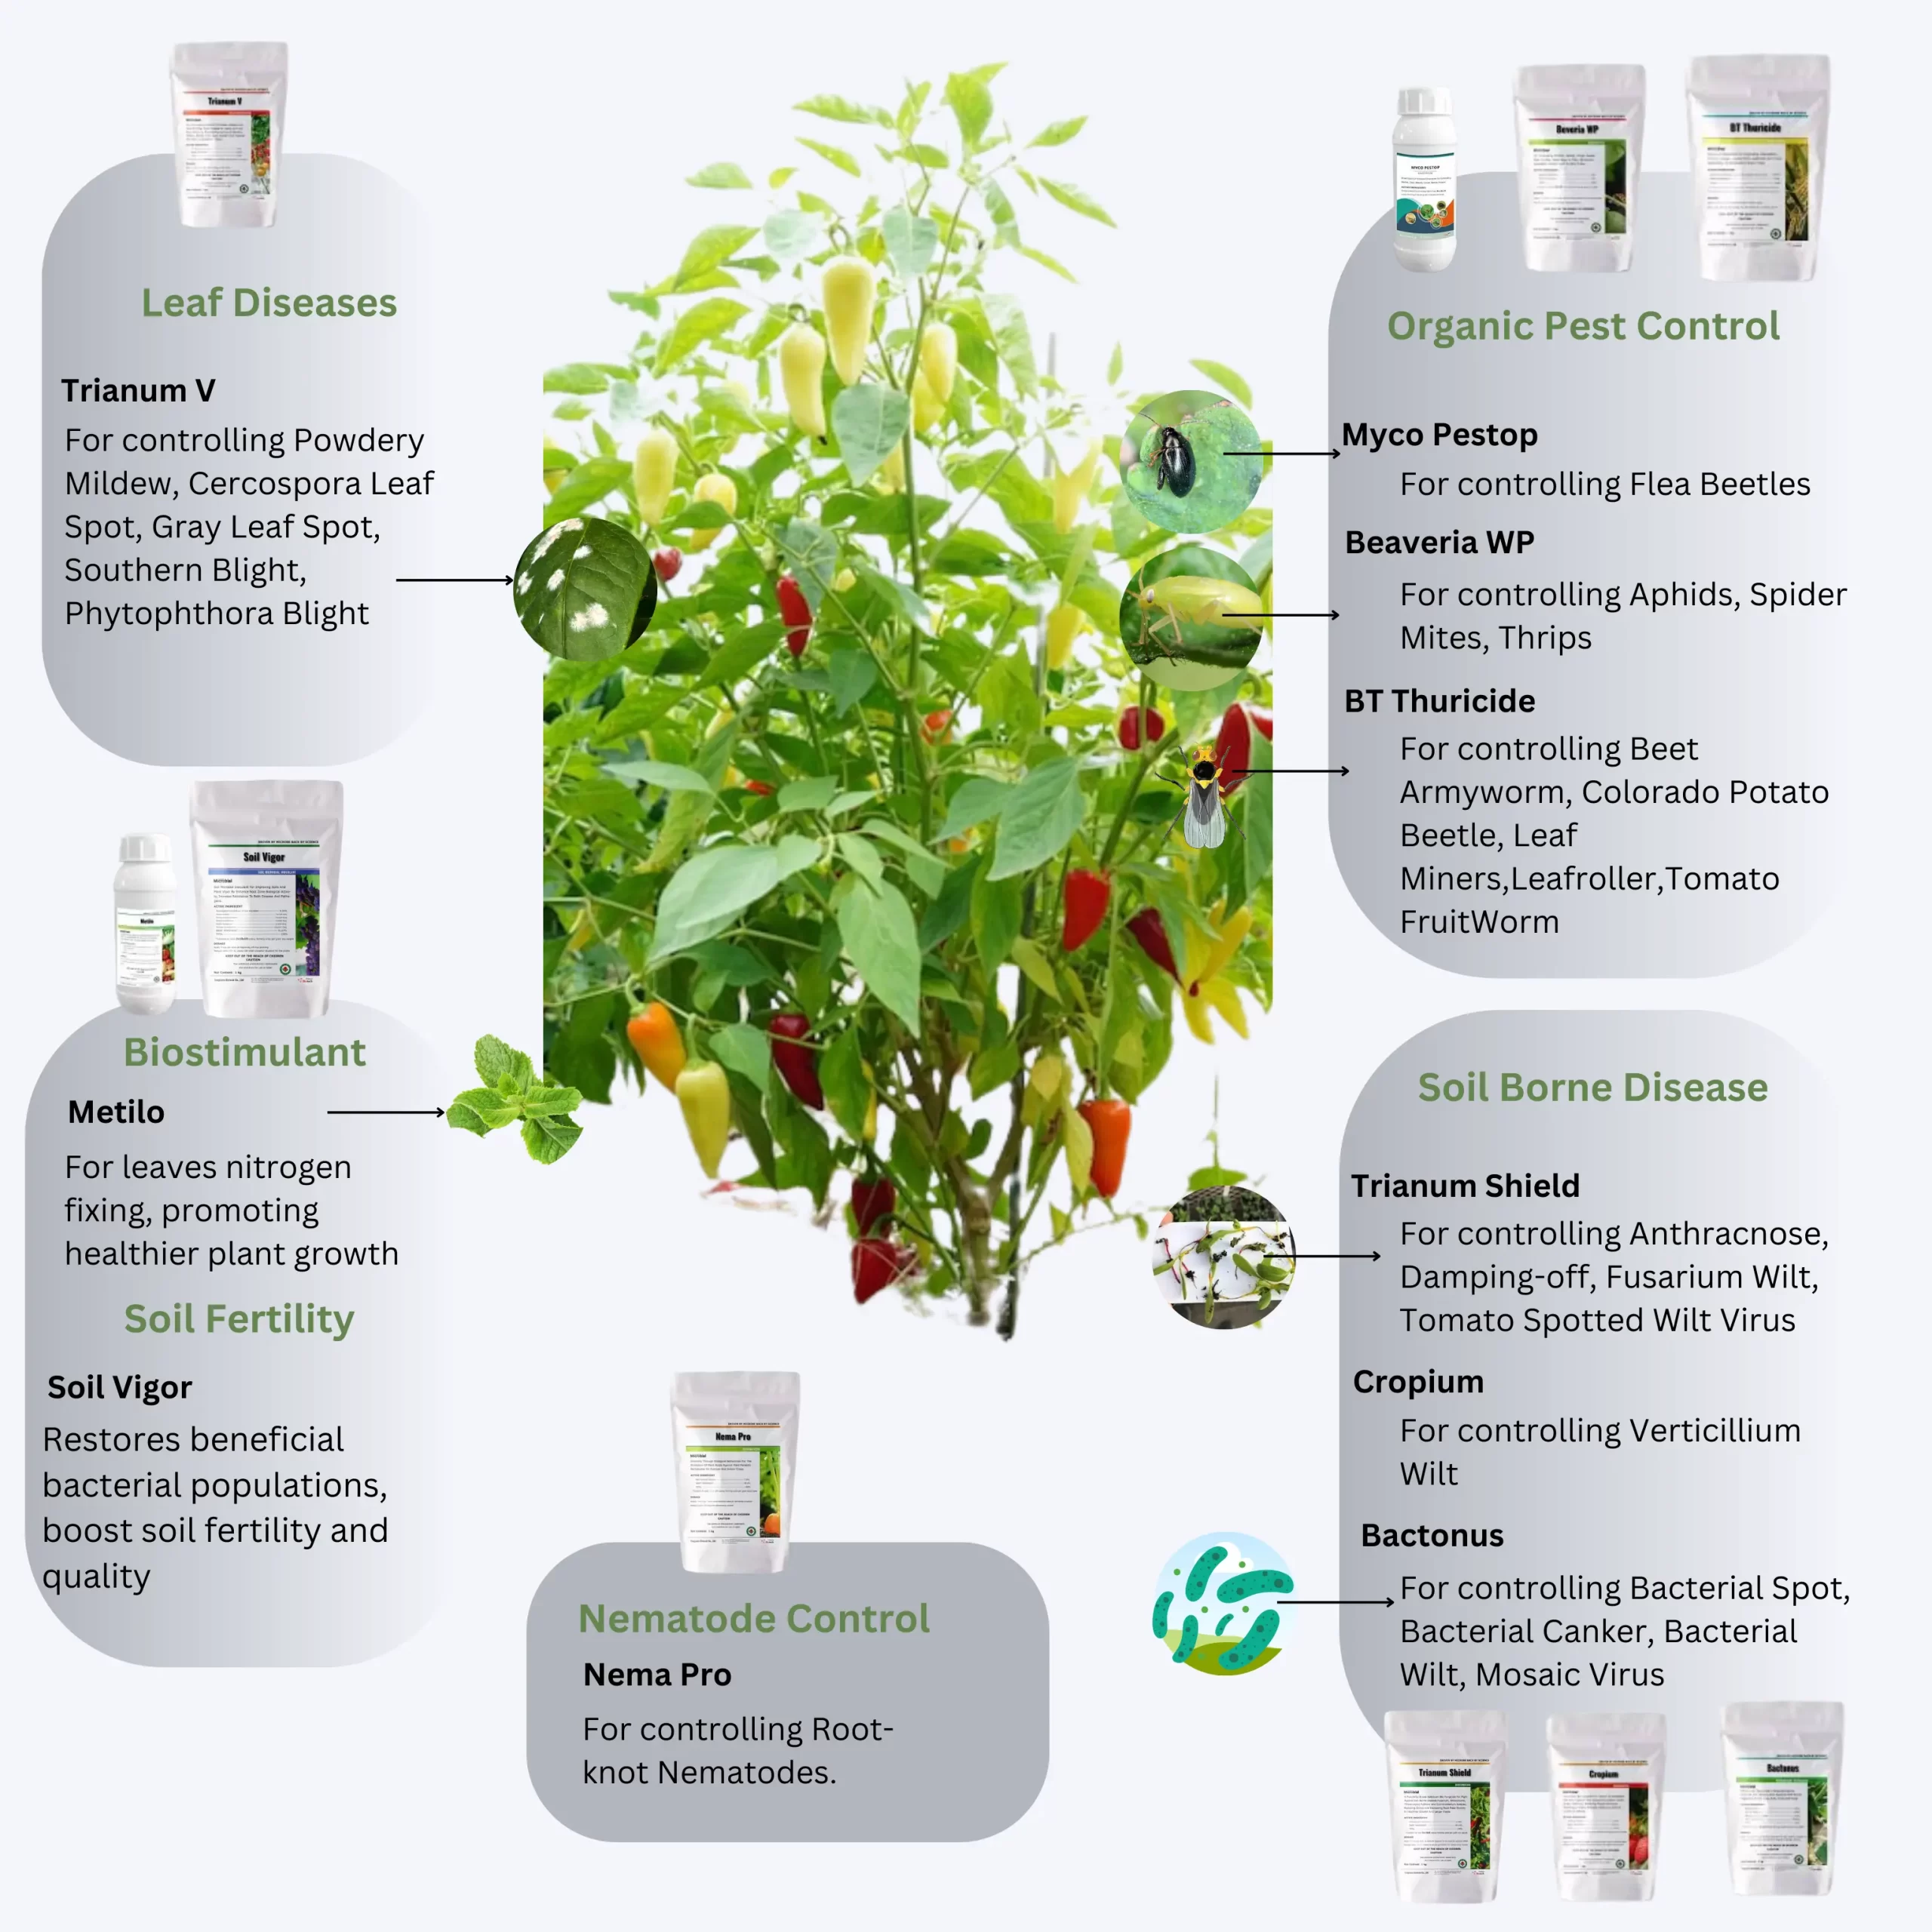 Illustration - of - a - healthy - pepper - plant - with - annotations - for - various - agricultural - products - and - their - purposes, - including - organic - pest - control, - soil - fertility, - leaf - diseases, - biostimulant, - soil - borne - disease, - and - nematode - control.